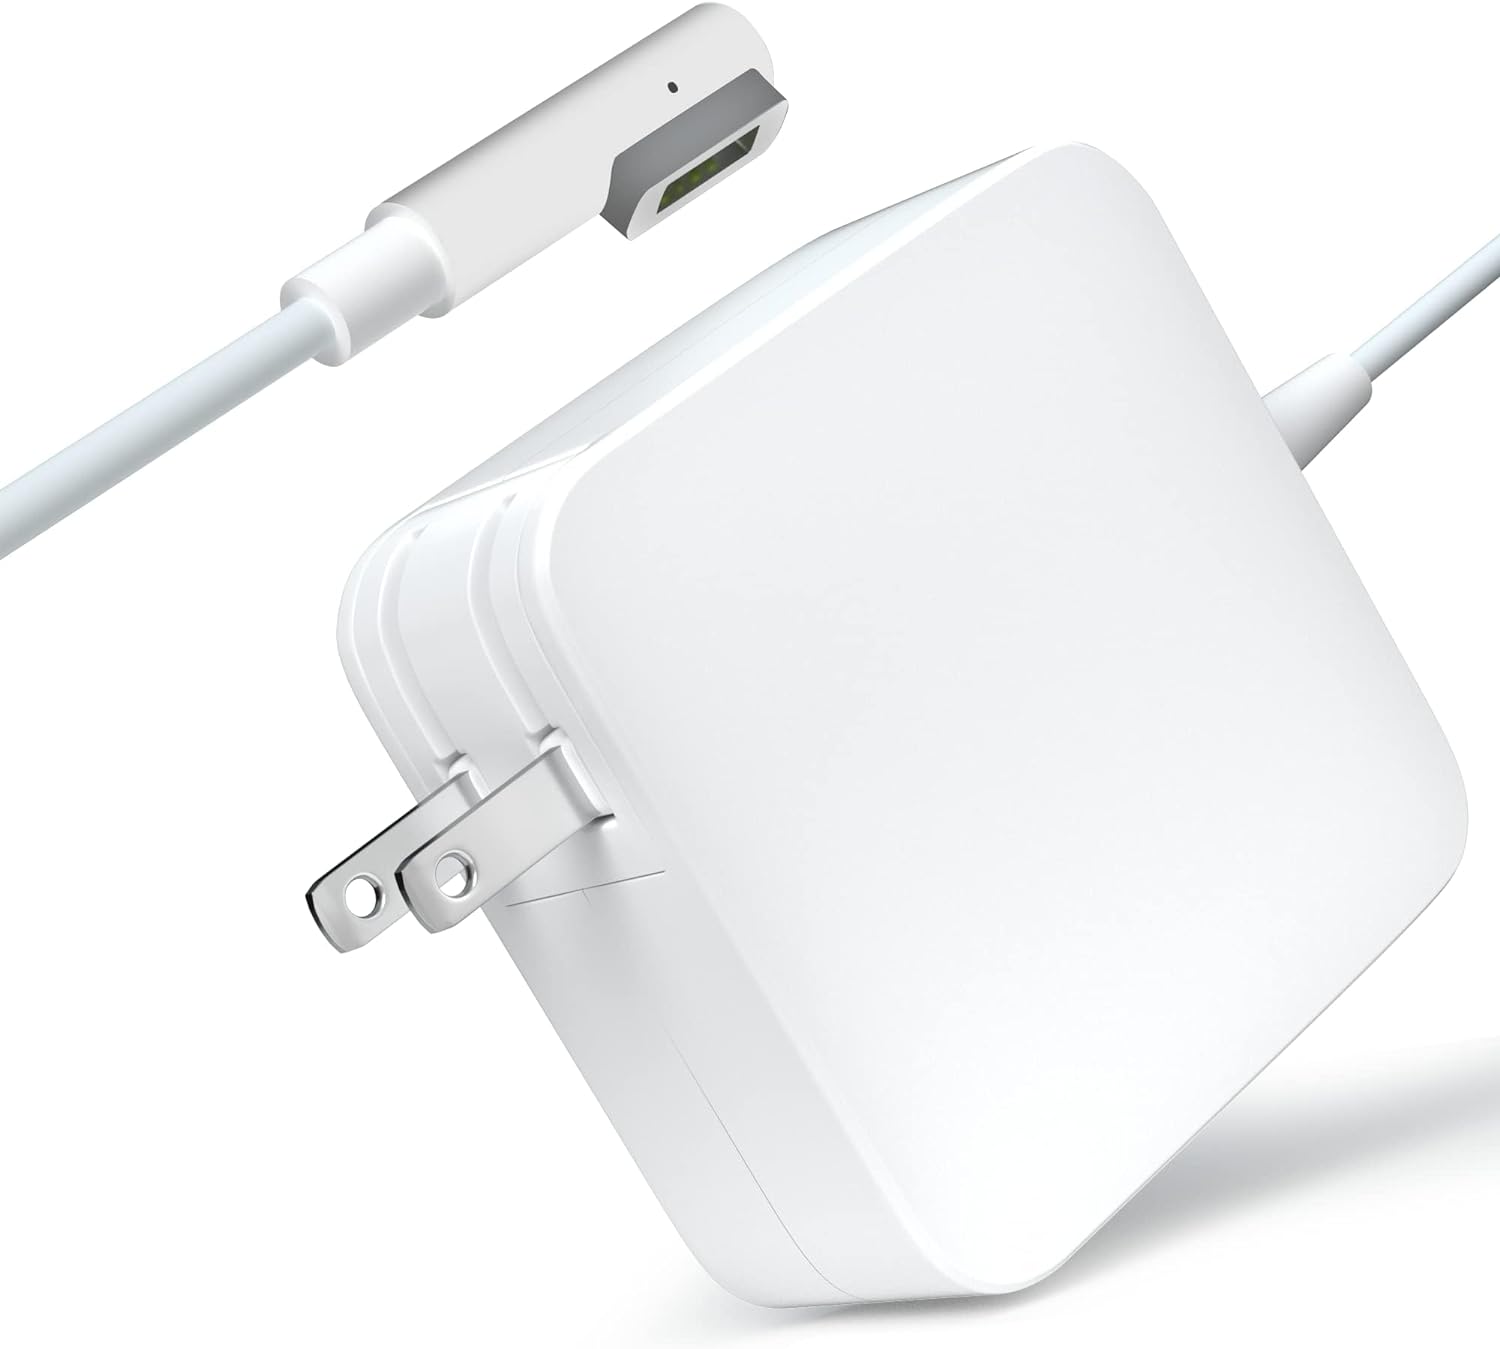 MacBook Pro Charger, Replacement for 13-inch MacBook Pro Display (Before Mid 2012), 60W AC Adapter L-Tip Connector for MacBook air Charger (Before 2011)